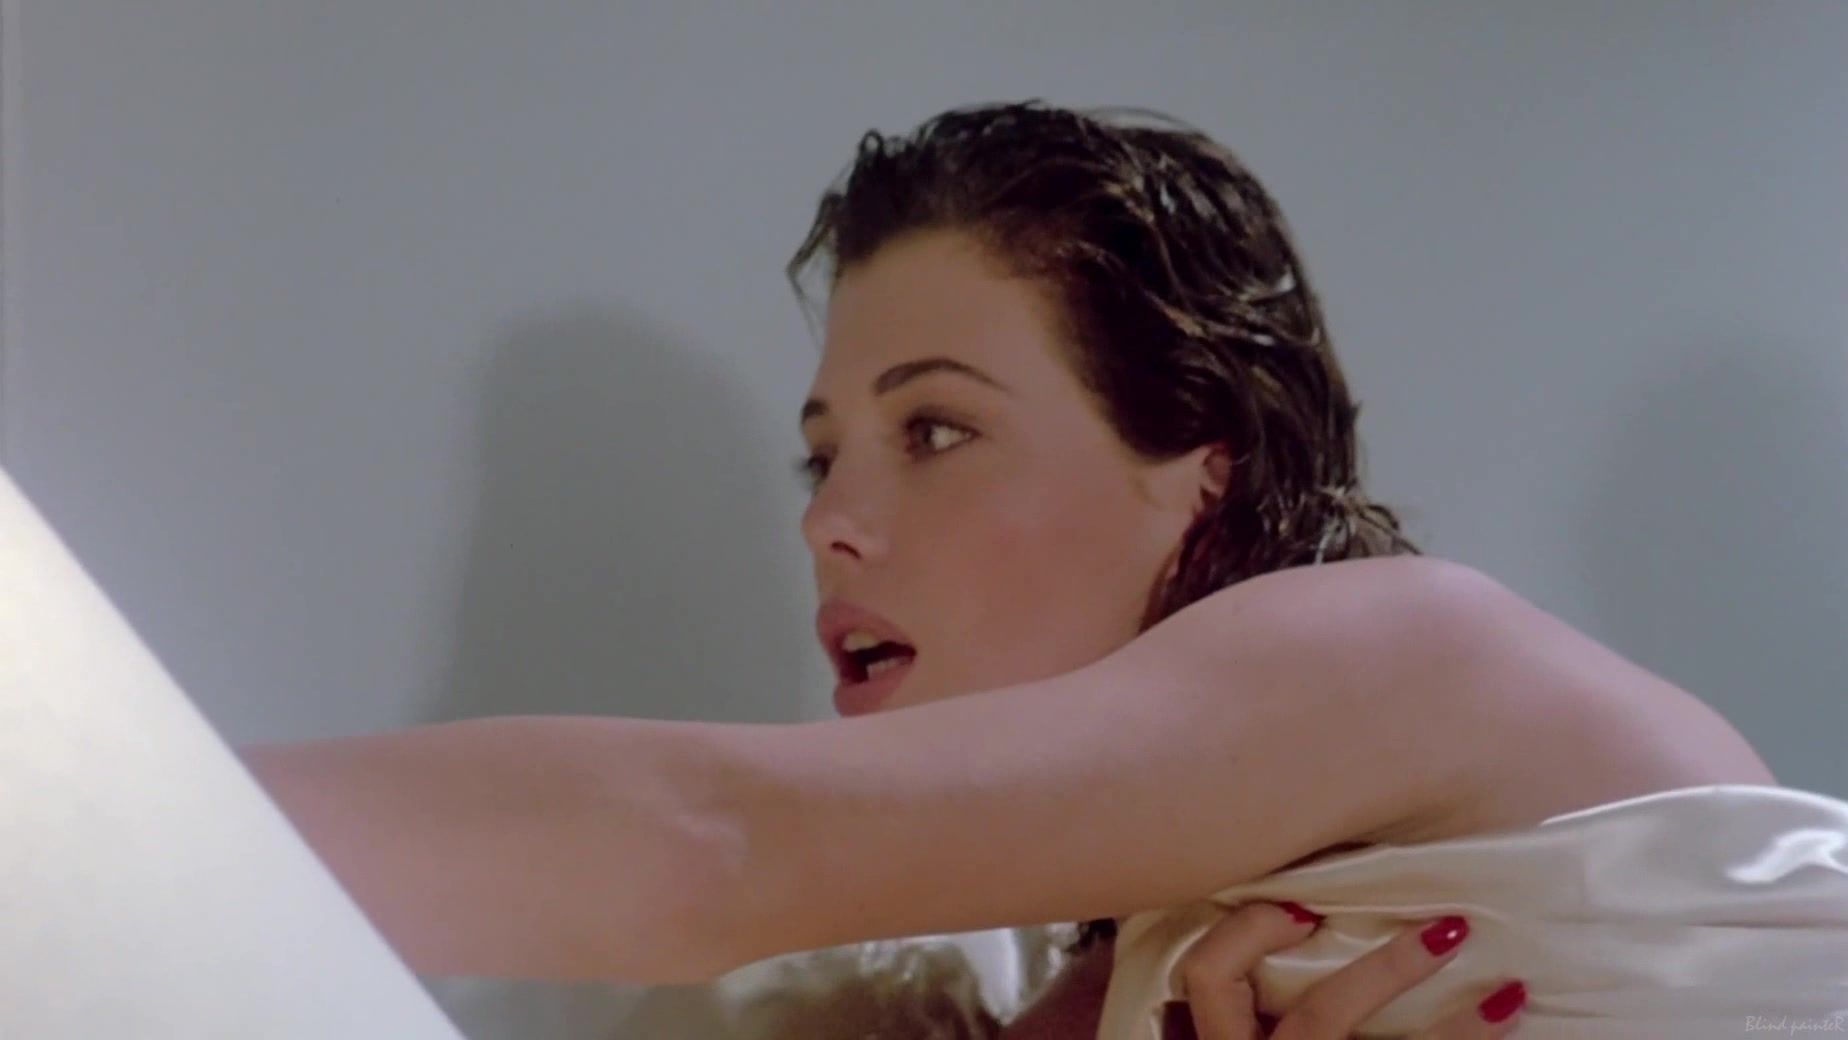 Blow Job Contest Kelly LeBrock nude - The Woman in Red (1984) Zenra